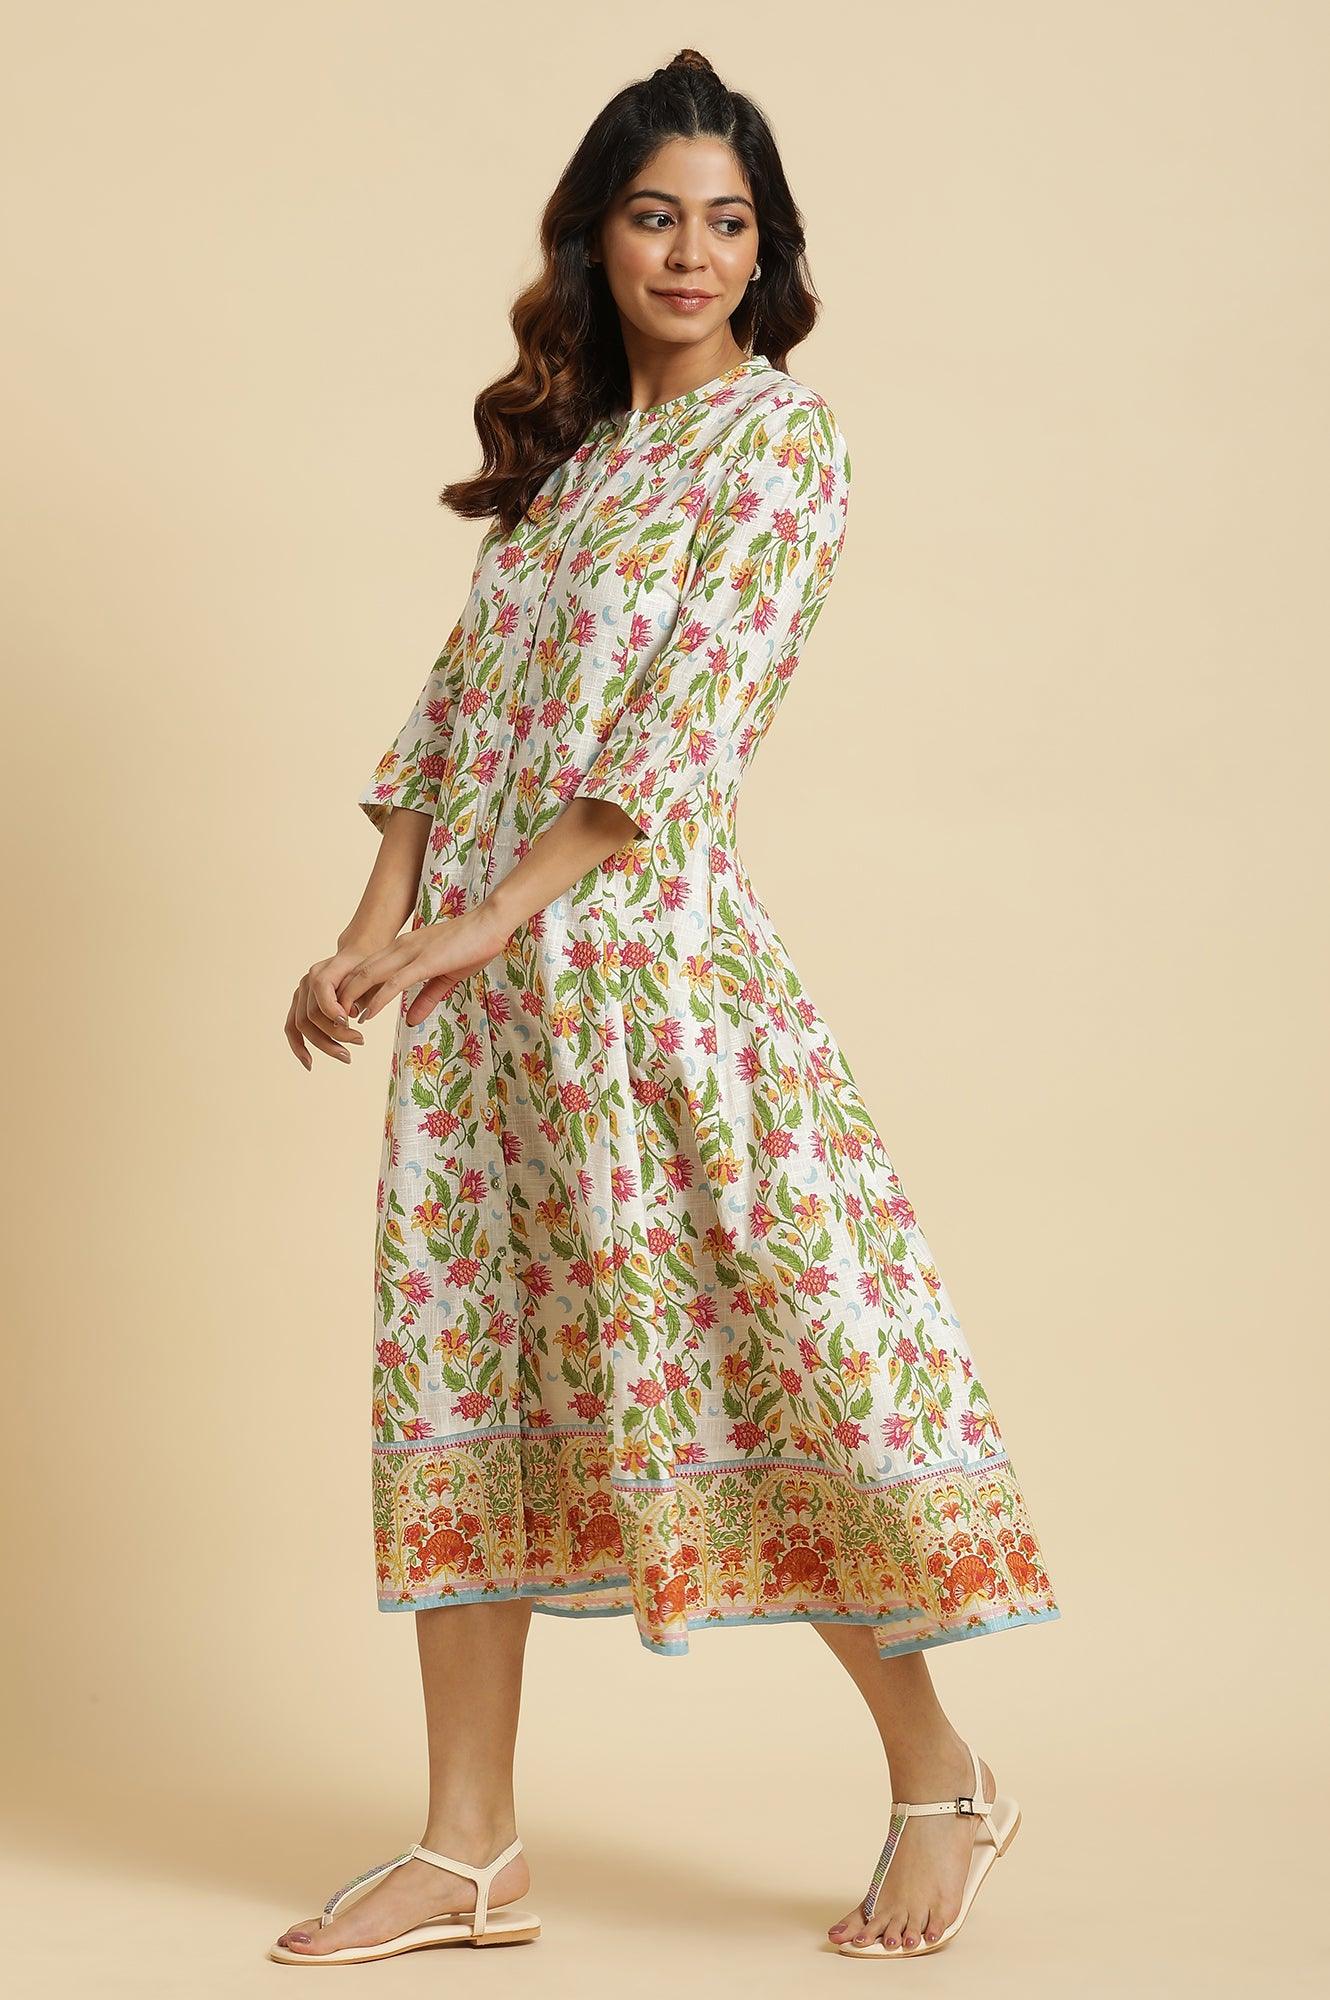 White Flared Dress In Multi-Coloured Floral Print - wforwoman